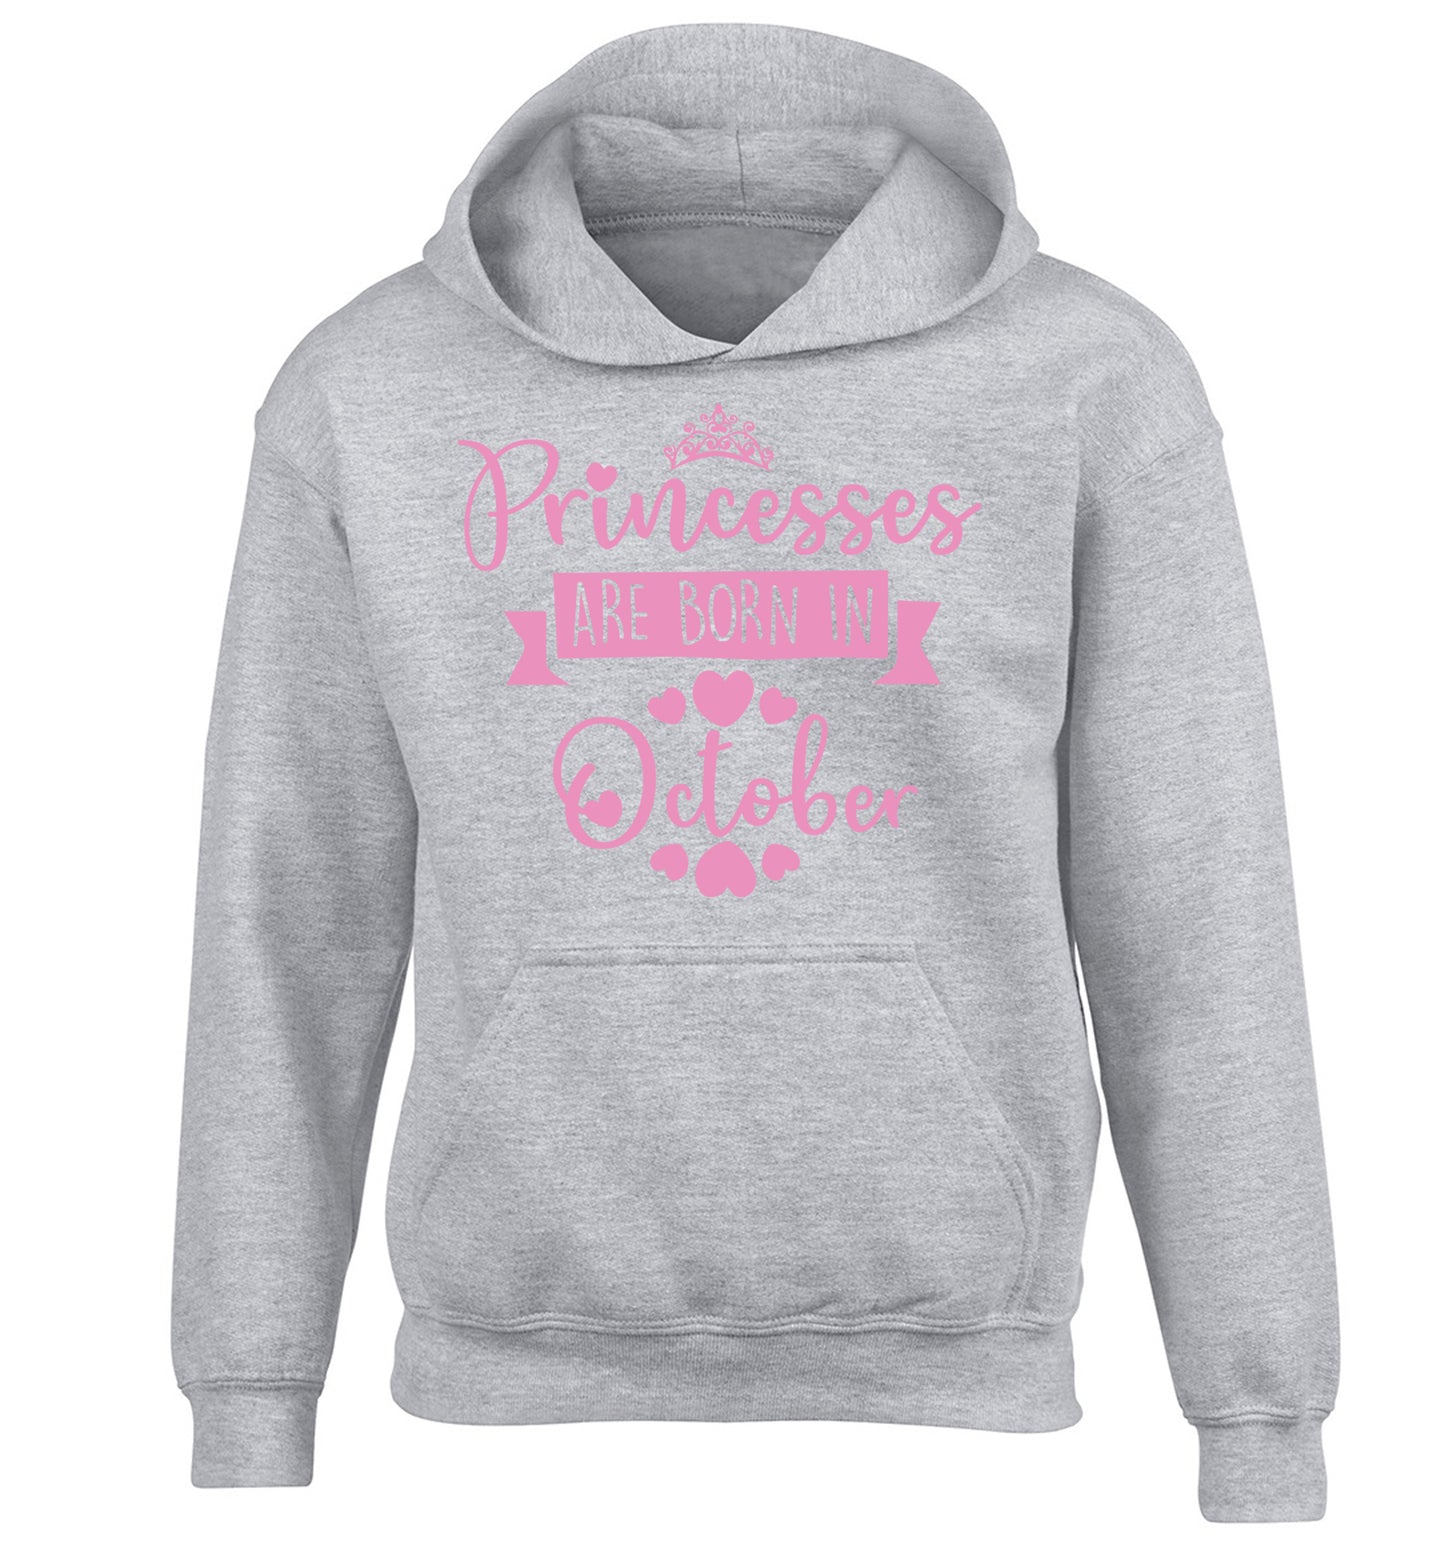 Princesses are born in October children's grey hoodie 12-13 Years